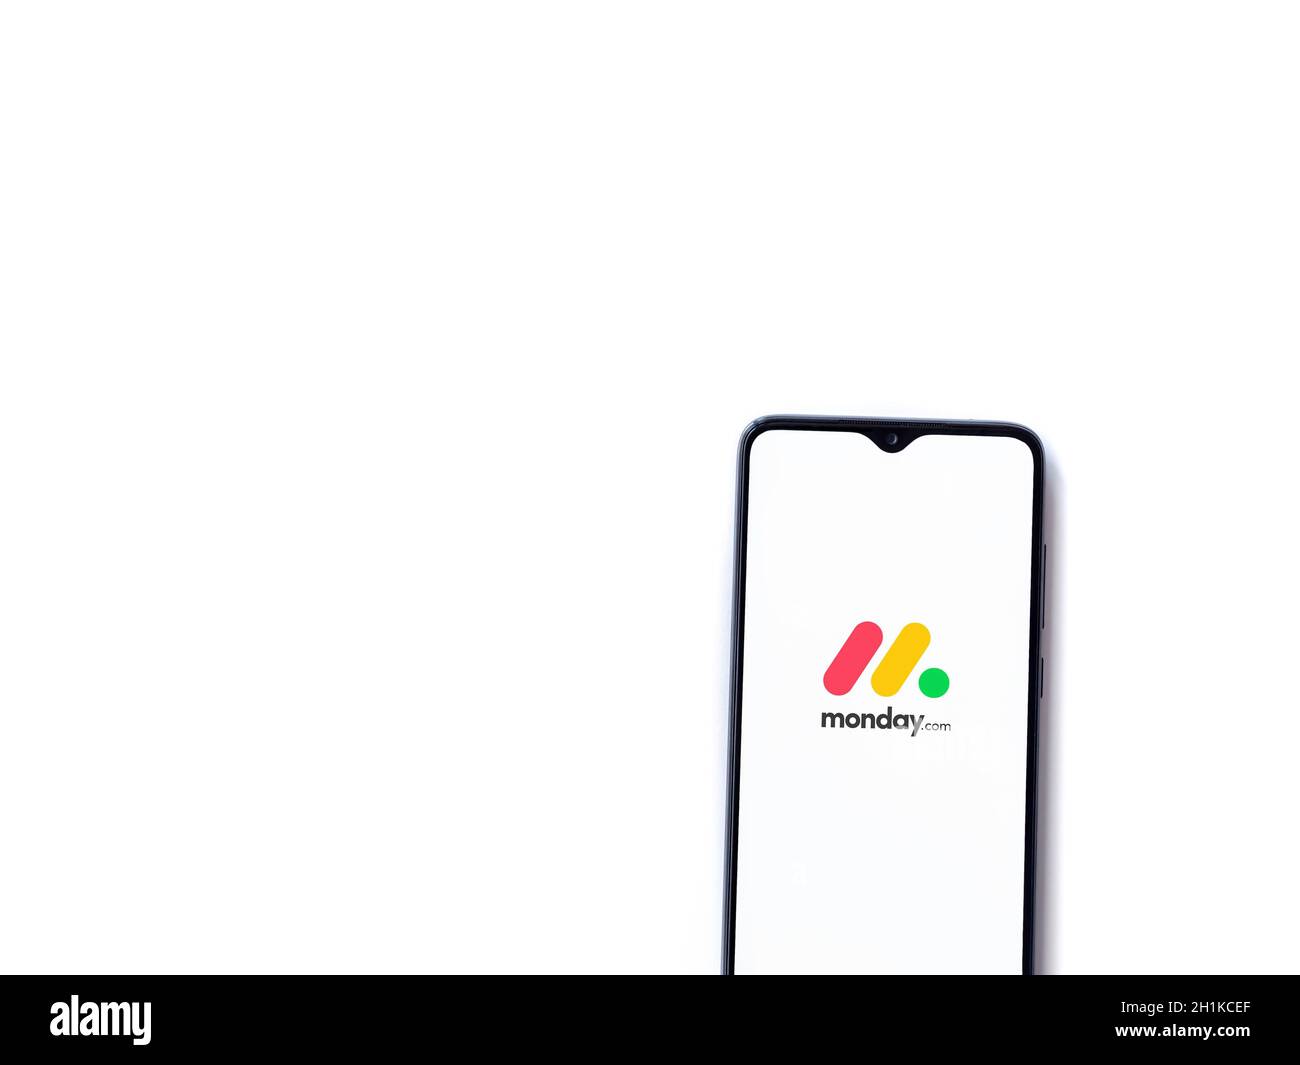 Lod, Israel - July 8, 2020: Monday app launch screen with logo on the display of a black mobile smartphone isolated on white background. Top view flat Stock Photo